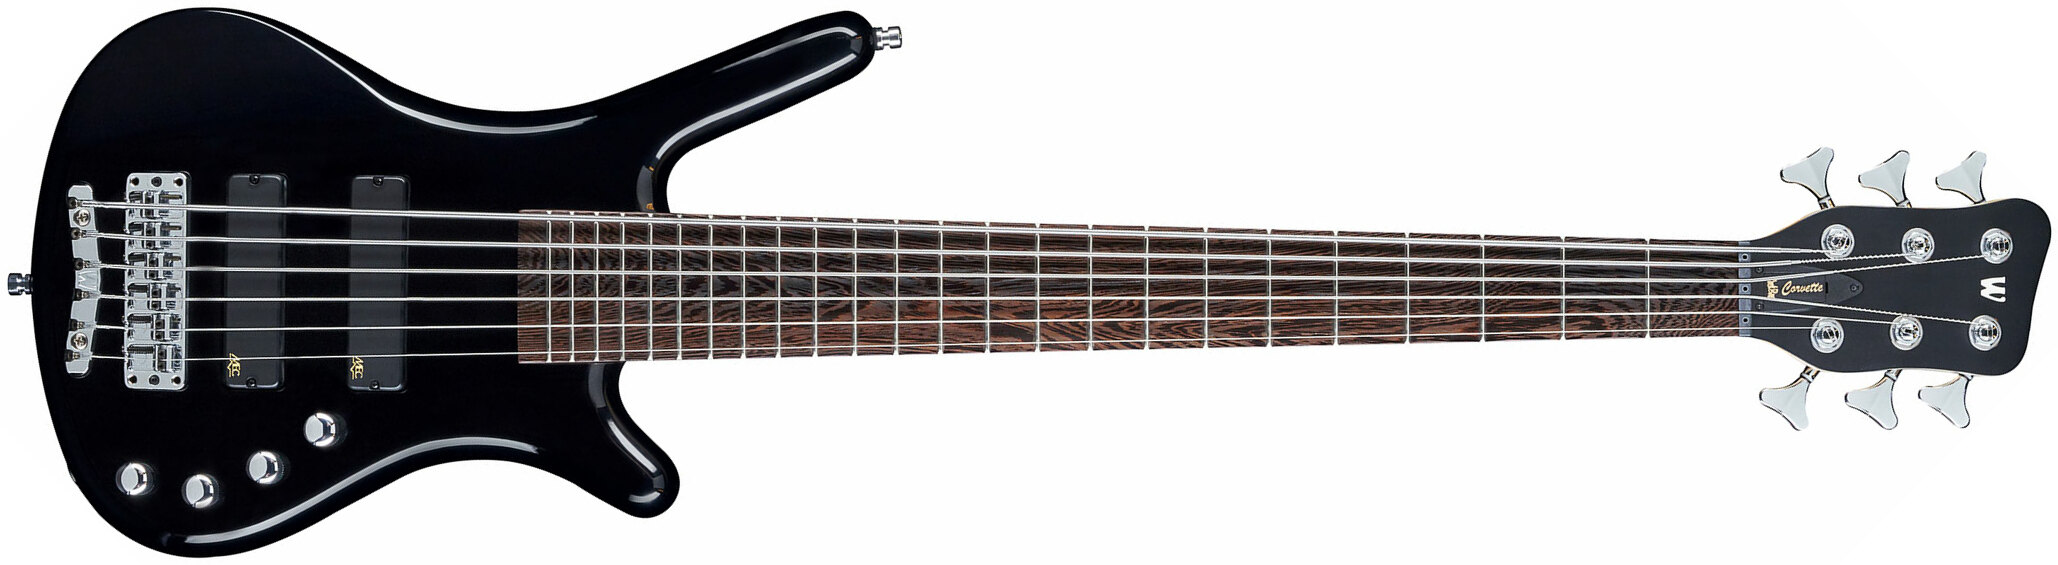 Warwick Corvette Basic 6c Rockbass Active Wen - Solid Black - Solid body electric bass - Main picture